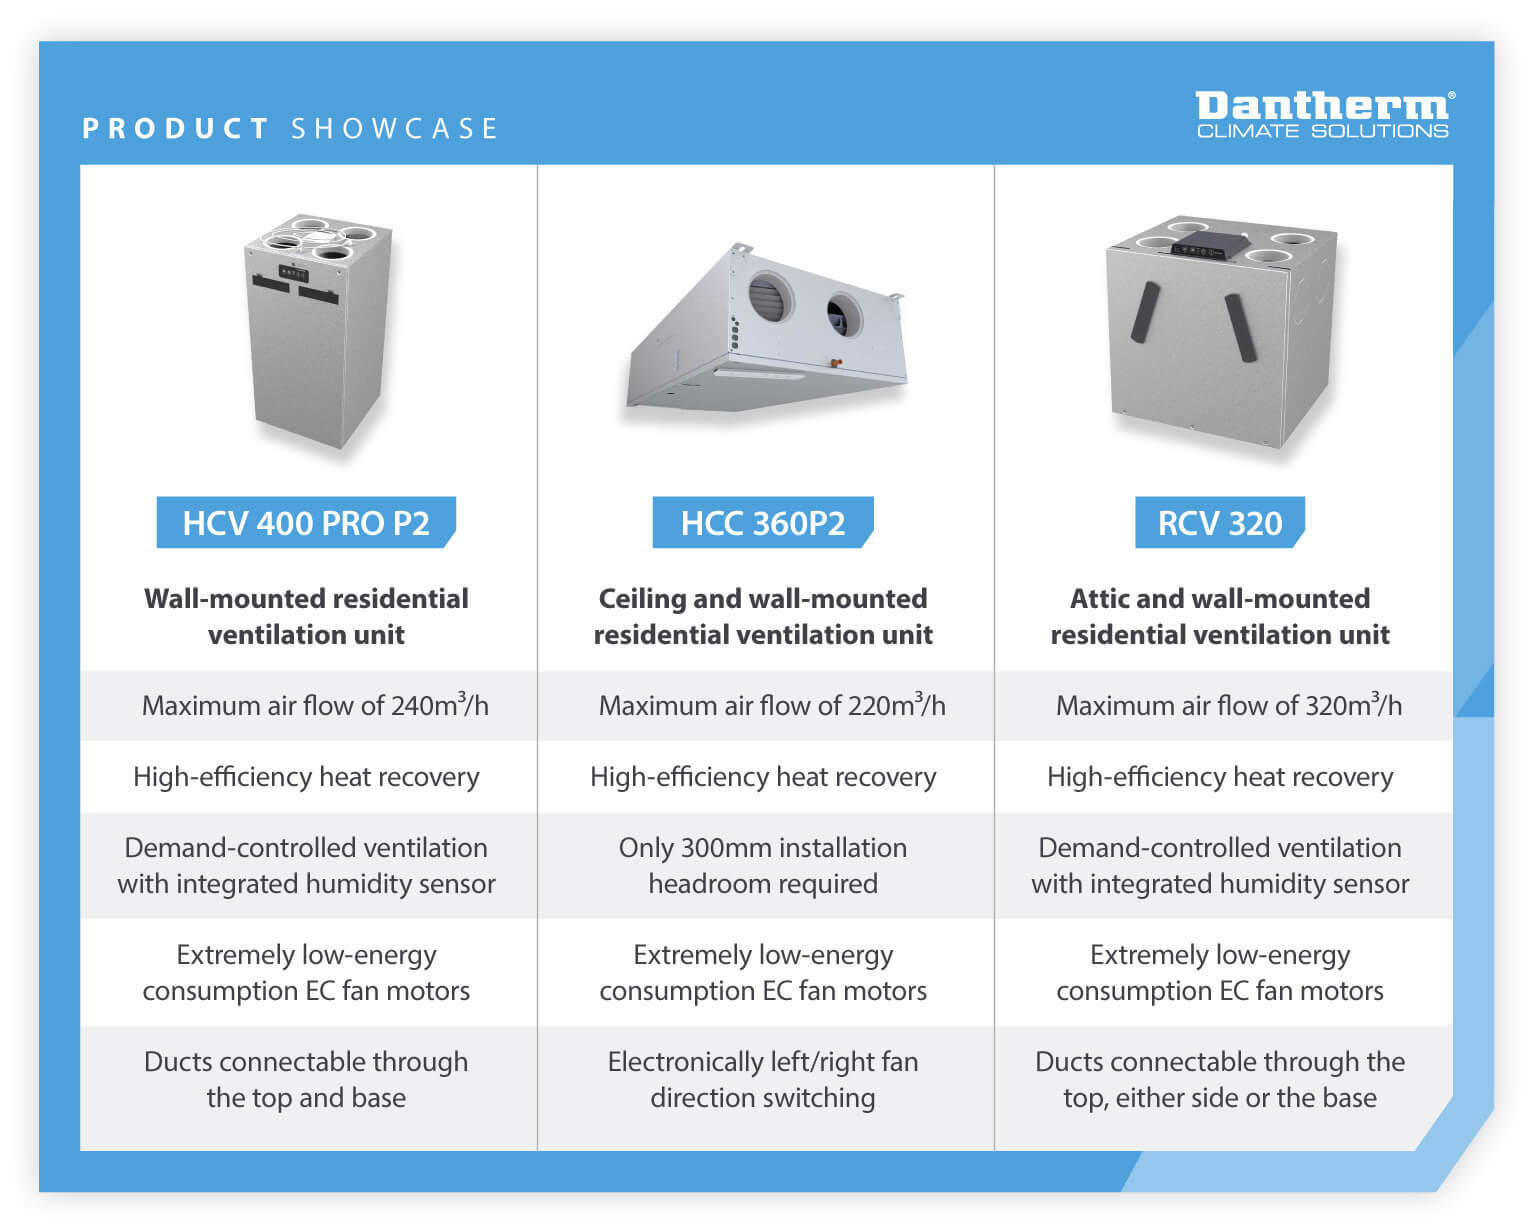 Product showcase of wall mounted residential ventilation units used - infographic image